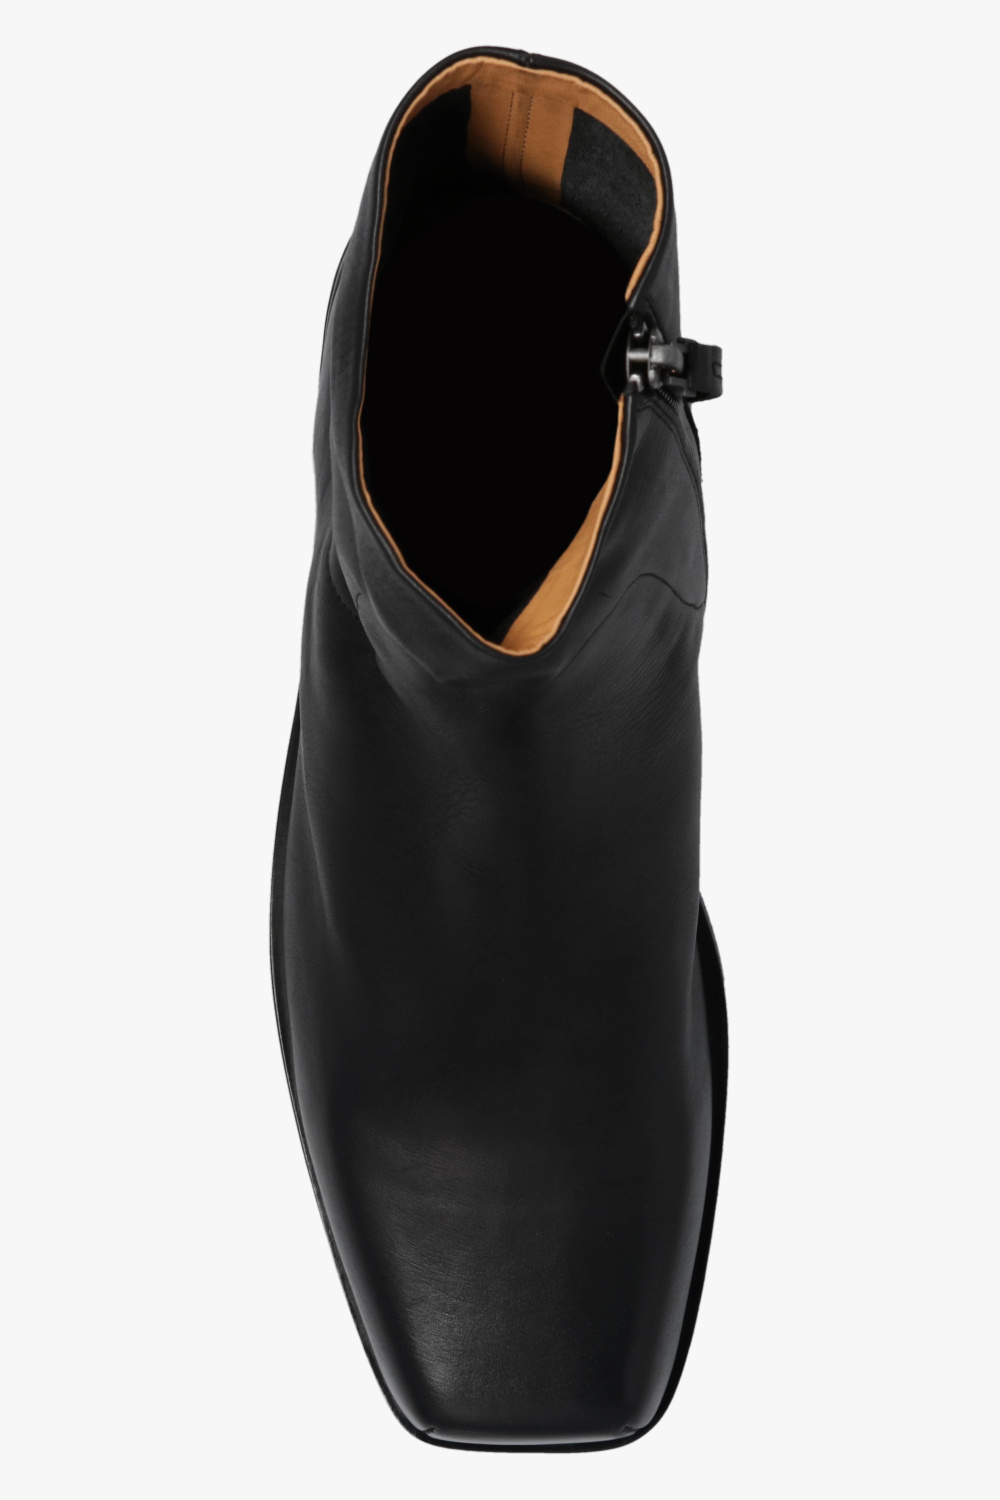 Marsell 'Cassello' leather shoes